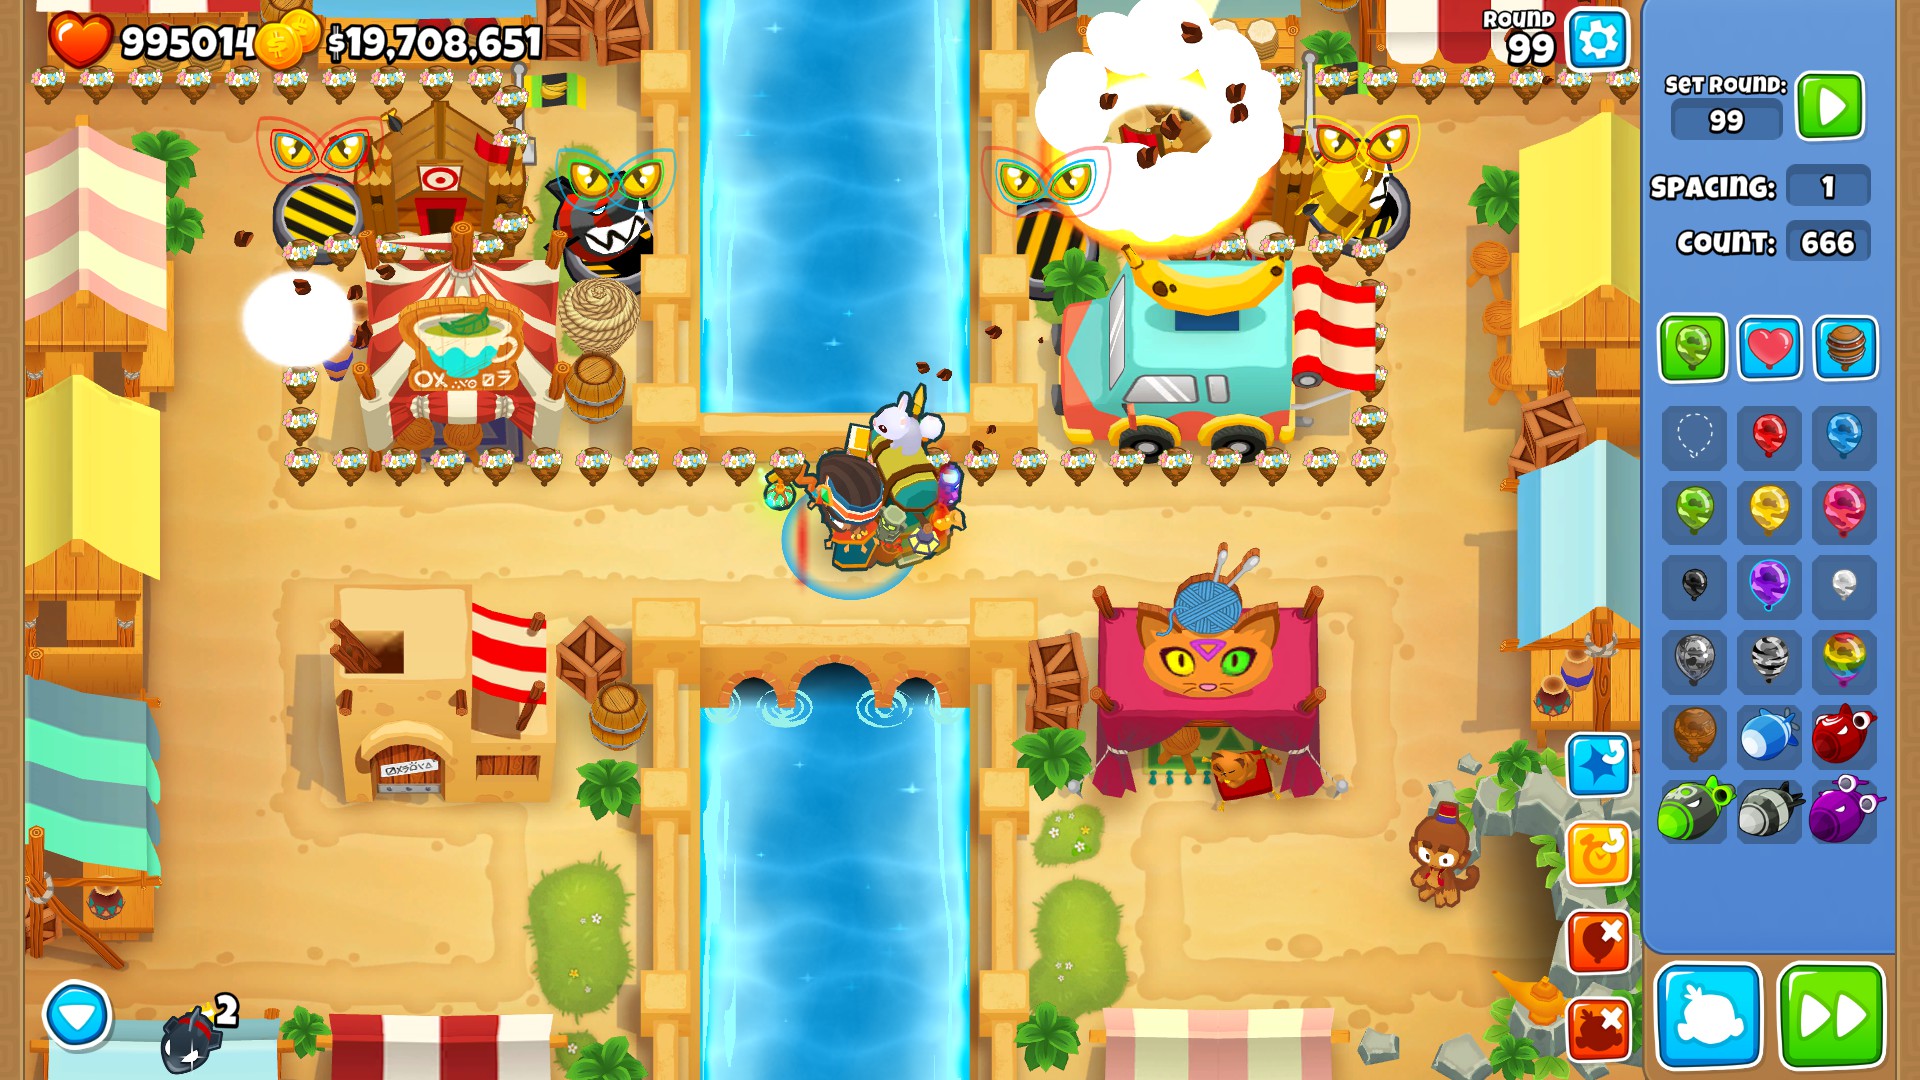 Bloons TD 6 Geraldo Wider Shop - See invisibility potion - 685659F